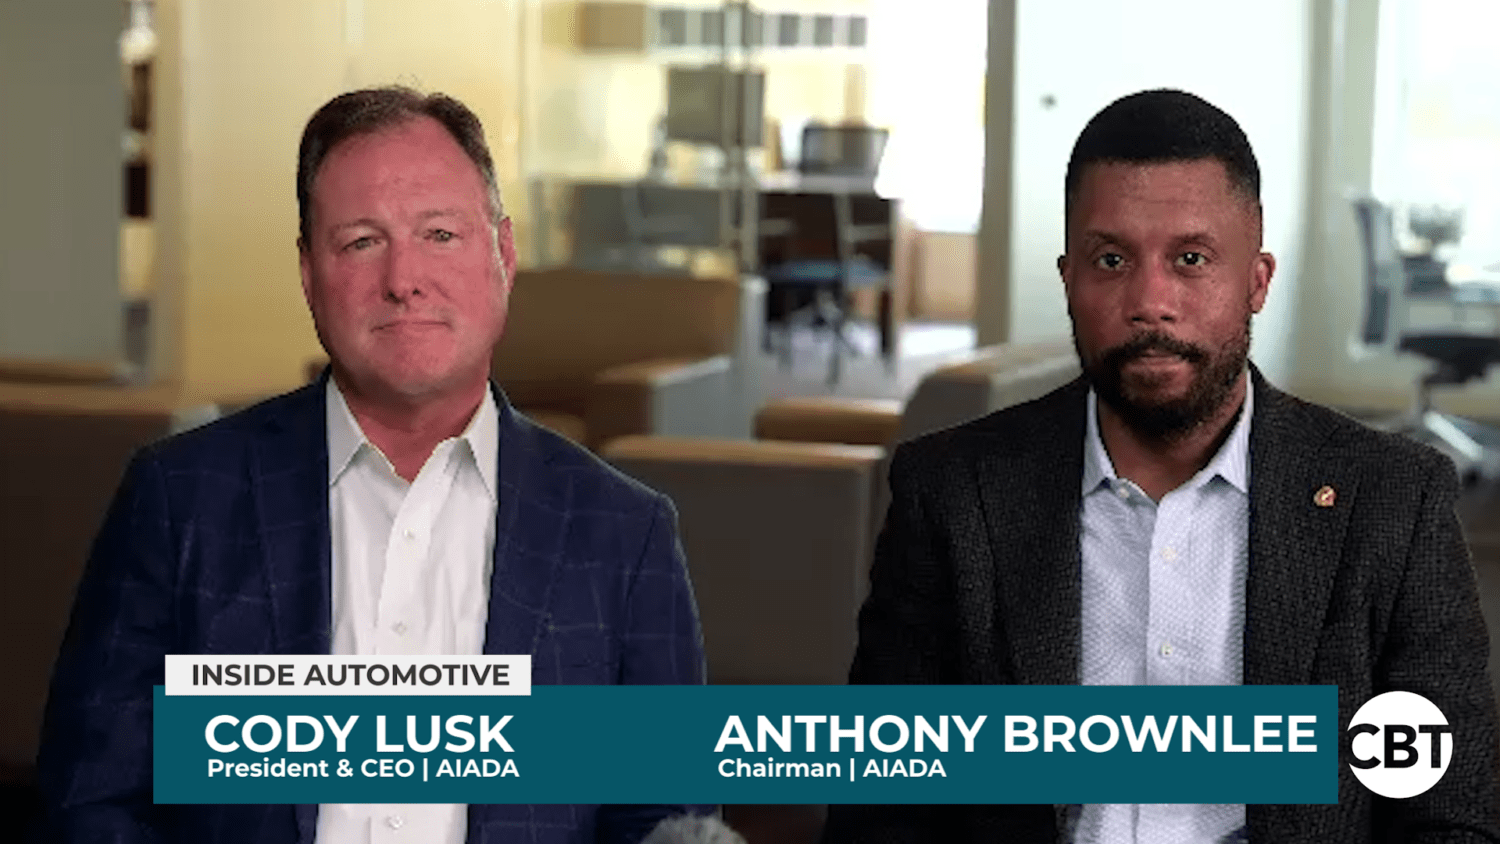 In this episode of Inside Automotive, Cody Lusk, the President and CEO of AIADA, and Anthony Brownlee discuss Biden's push toward EVs.